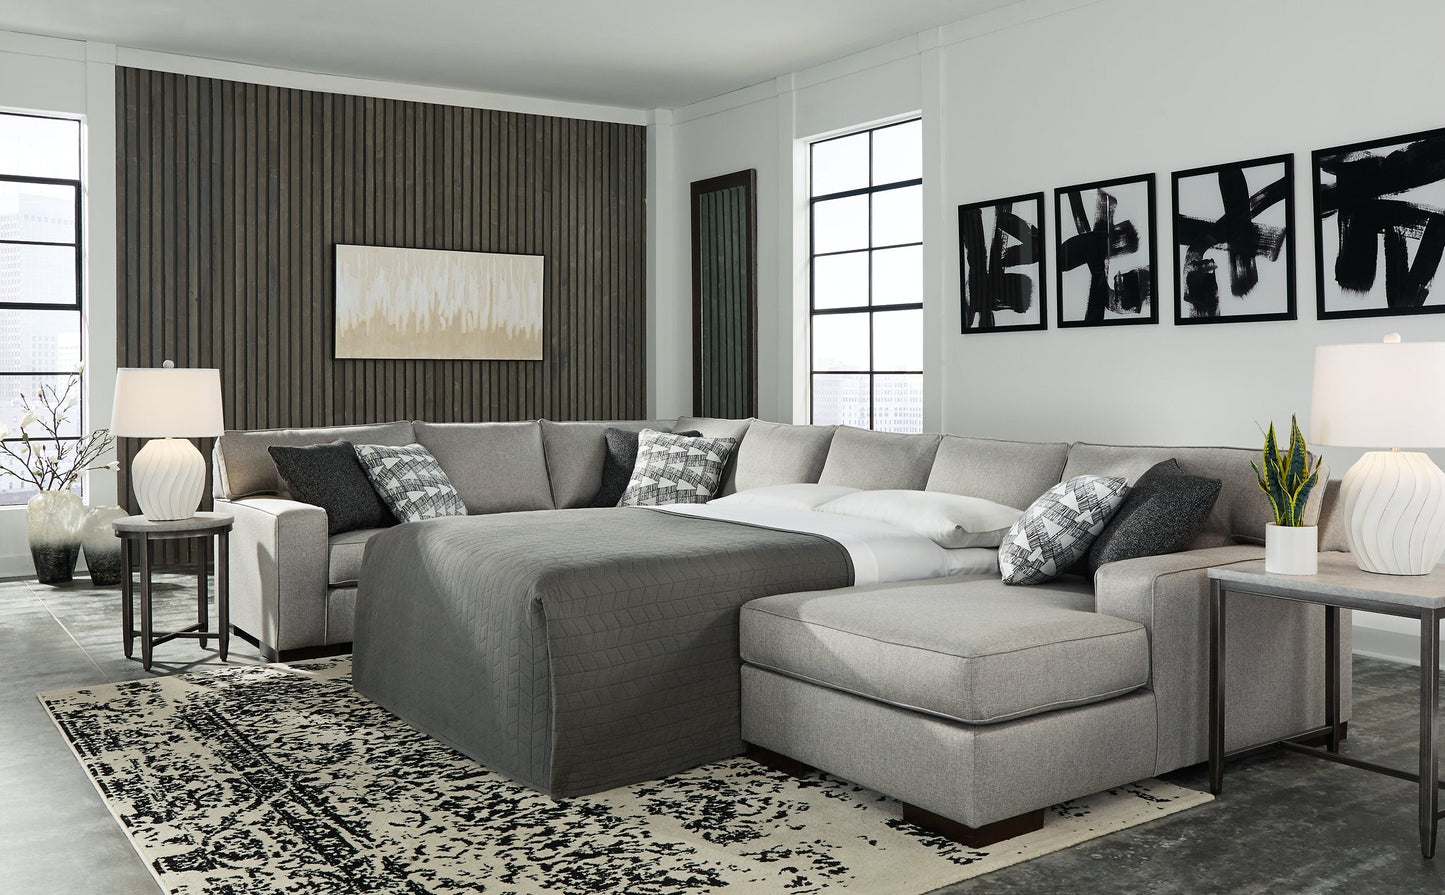 Marsing Nuvella Benchcraft 5-Piece Sleeper Sectional with Chaise image